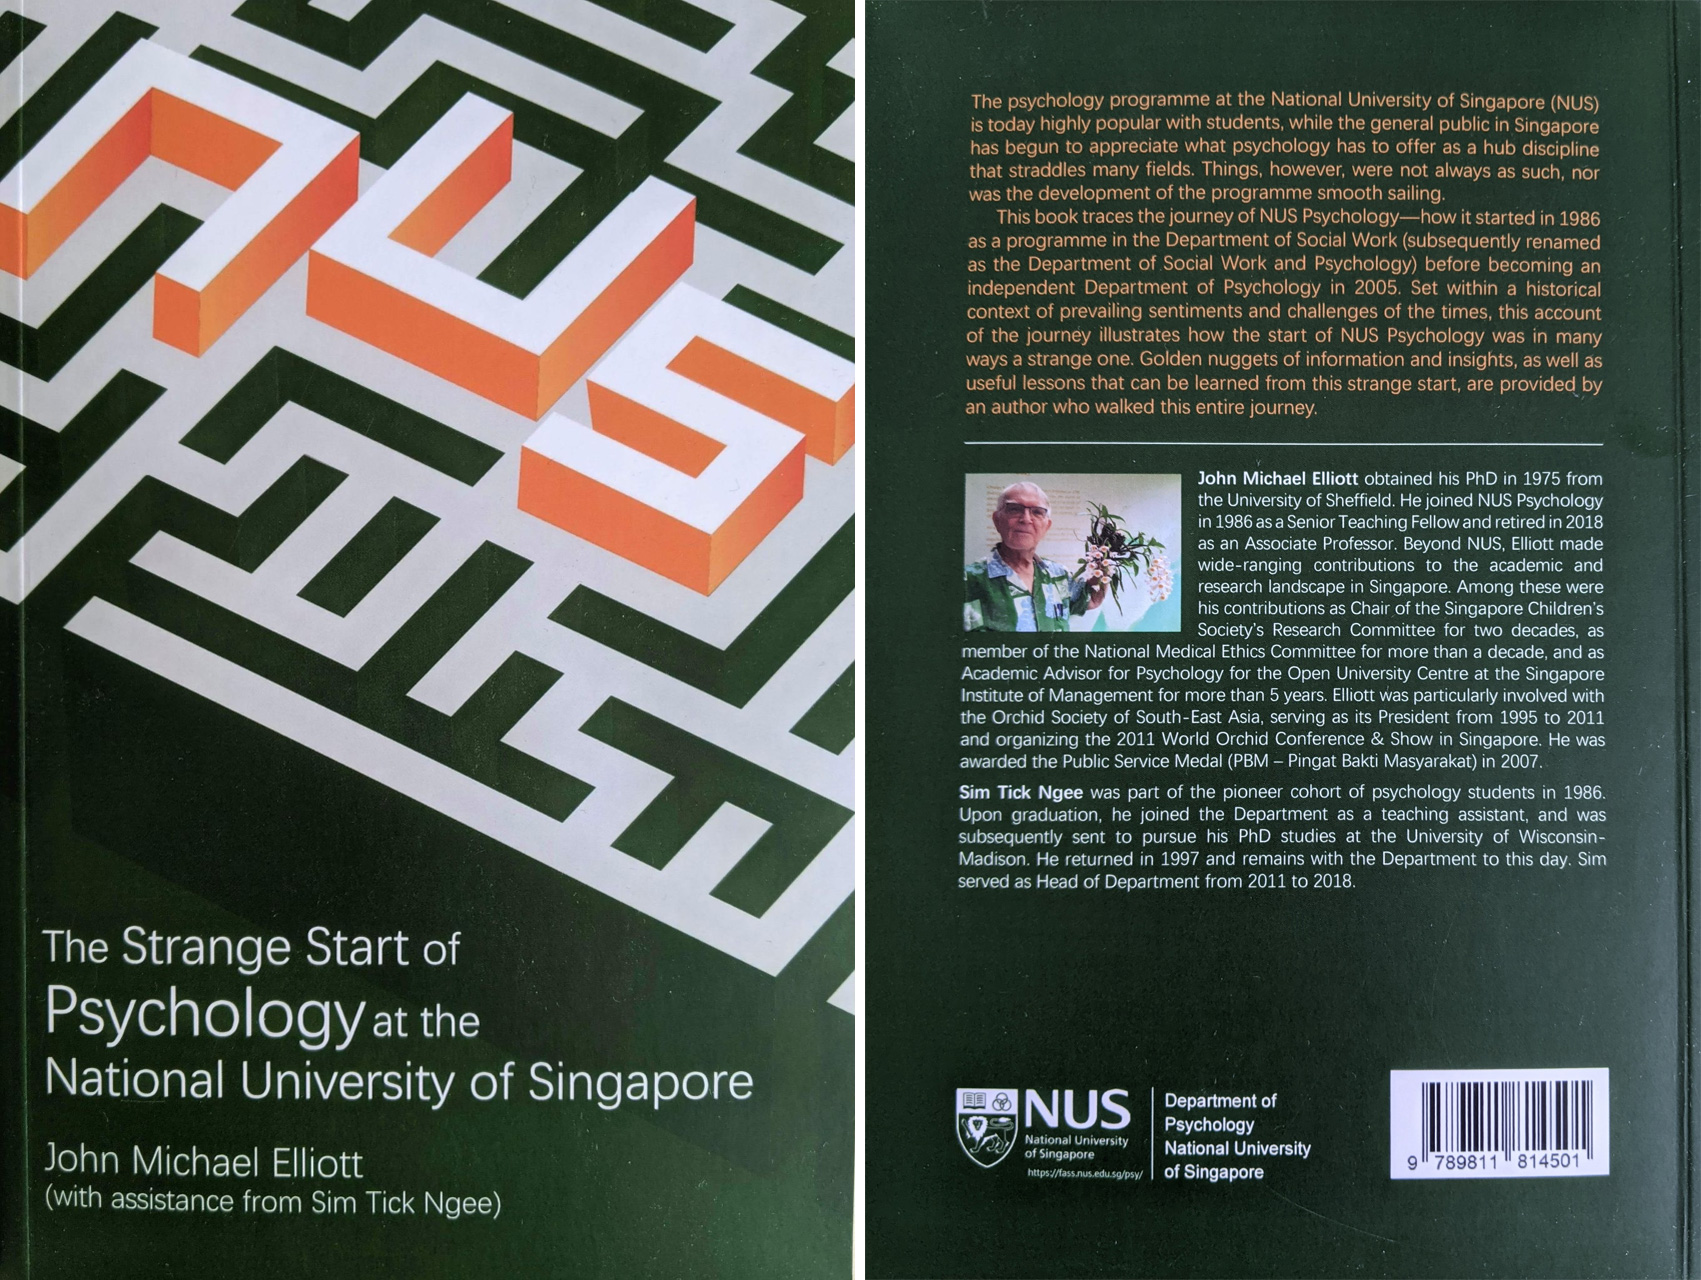 Book-Cover_The-Strange-Start-of-Psychology-at-the-NUS